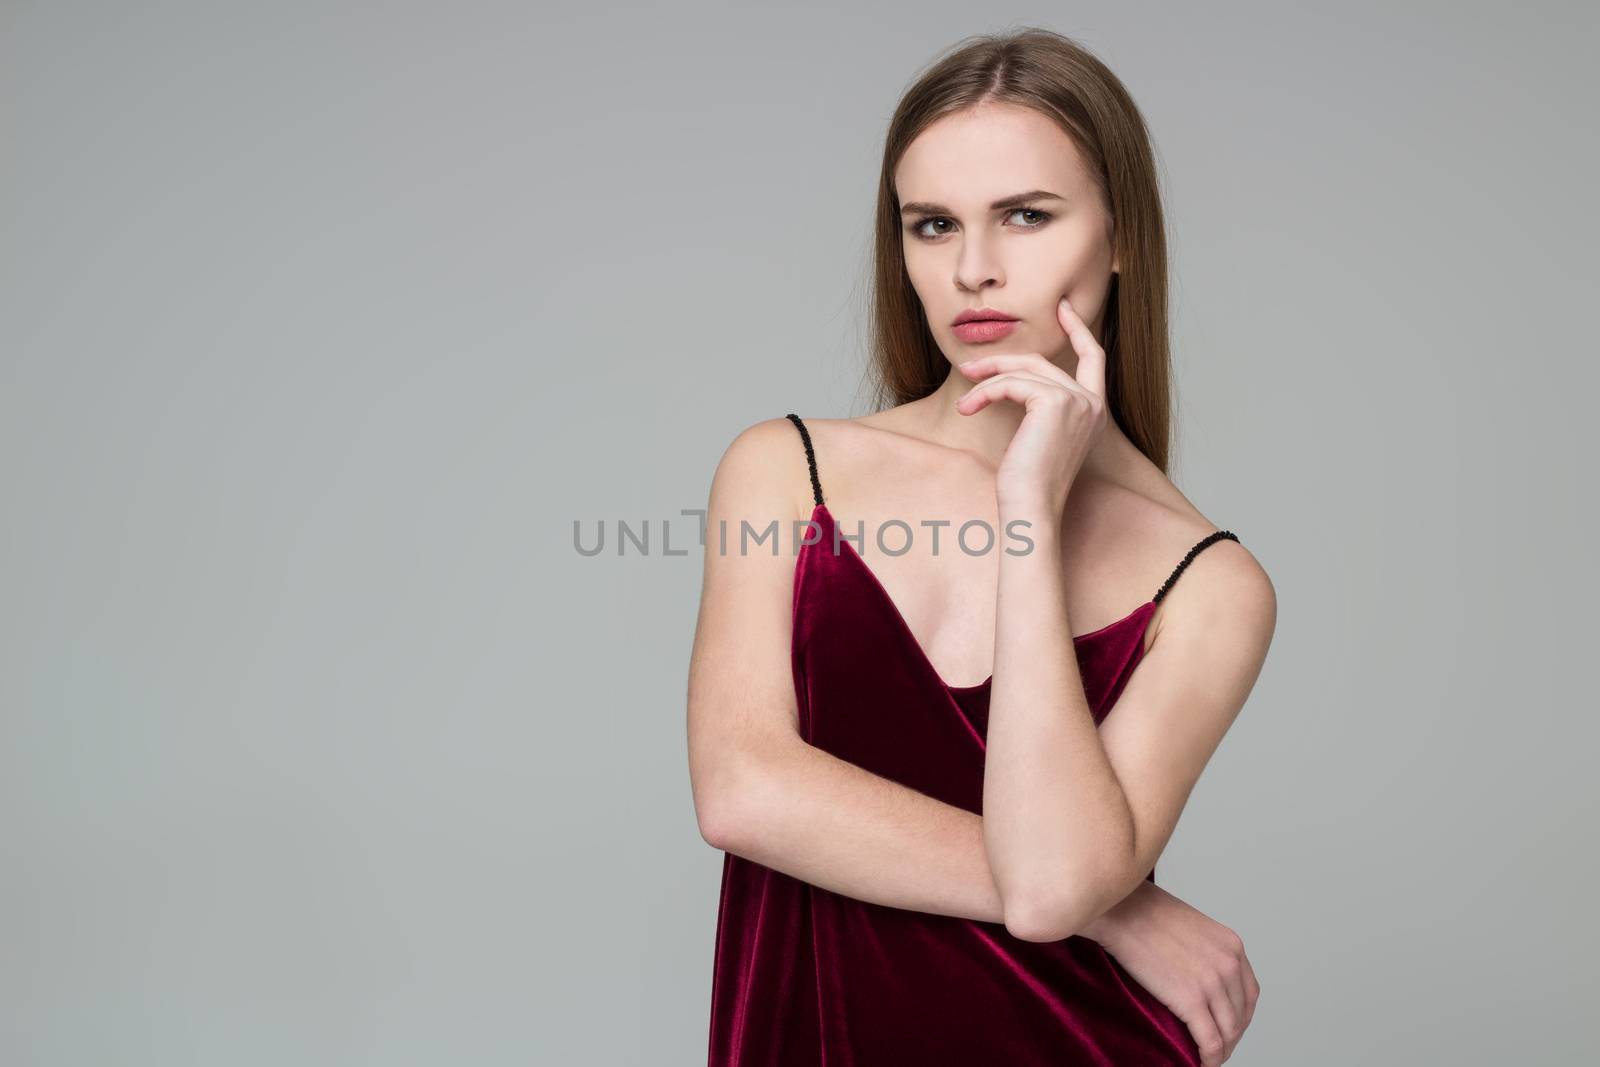 Blond girl in red poses showing emotions: wistfulness, dreamines by VeraVerano